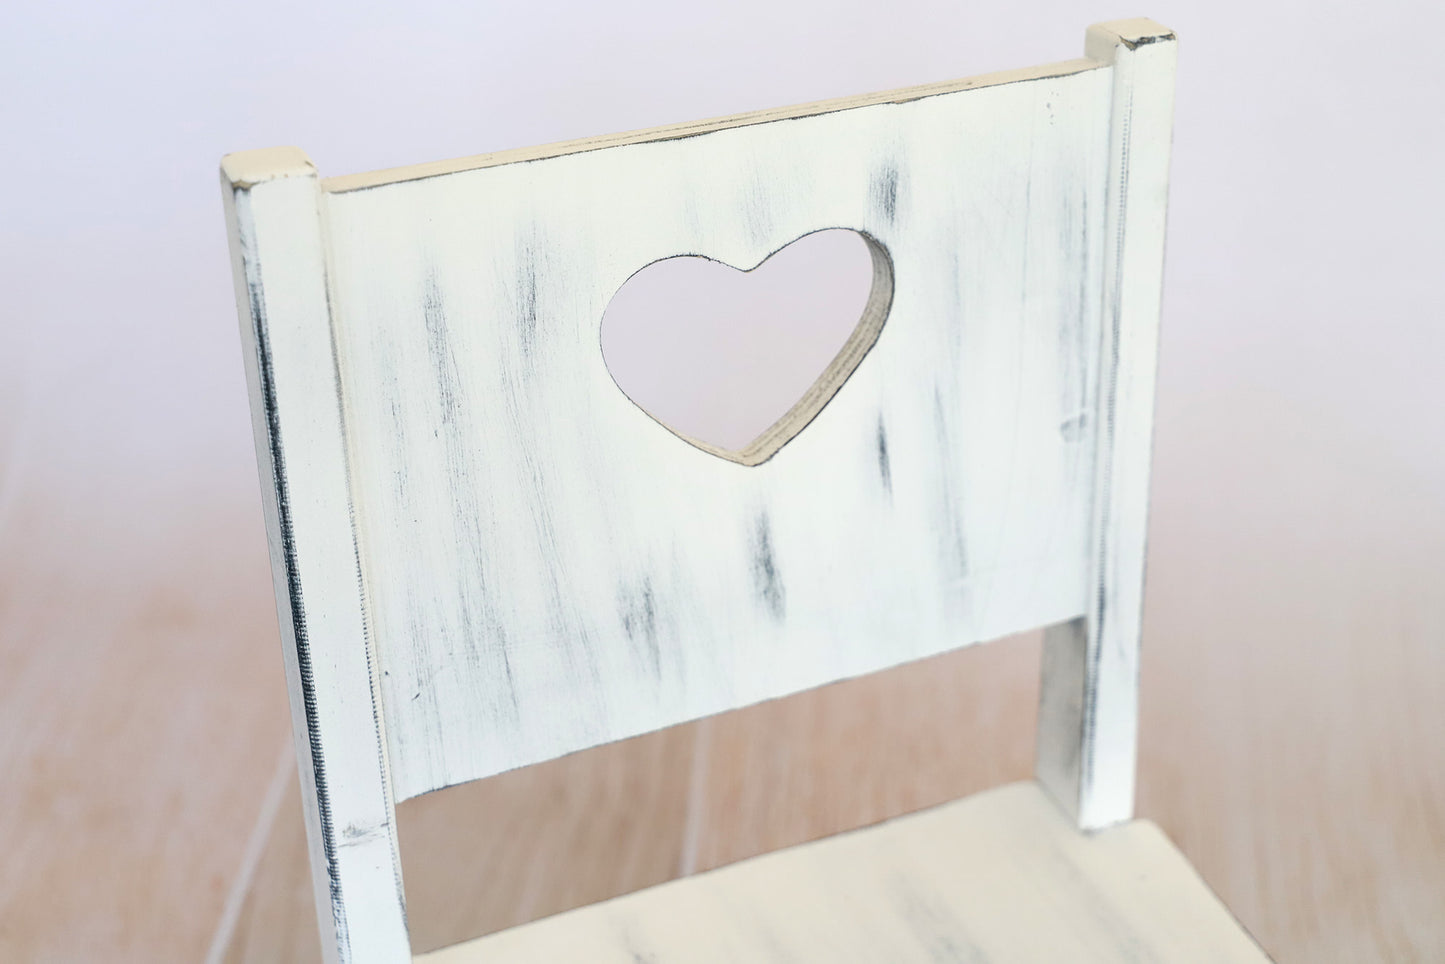 Small Wooden Harlow Chair - Heart Center